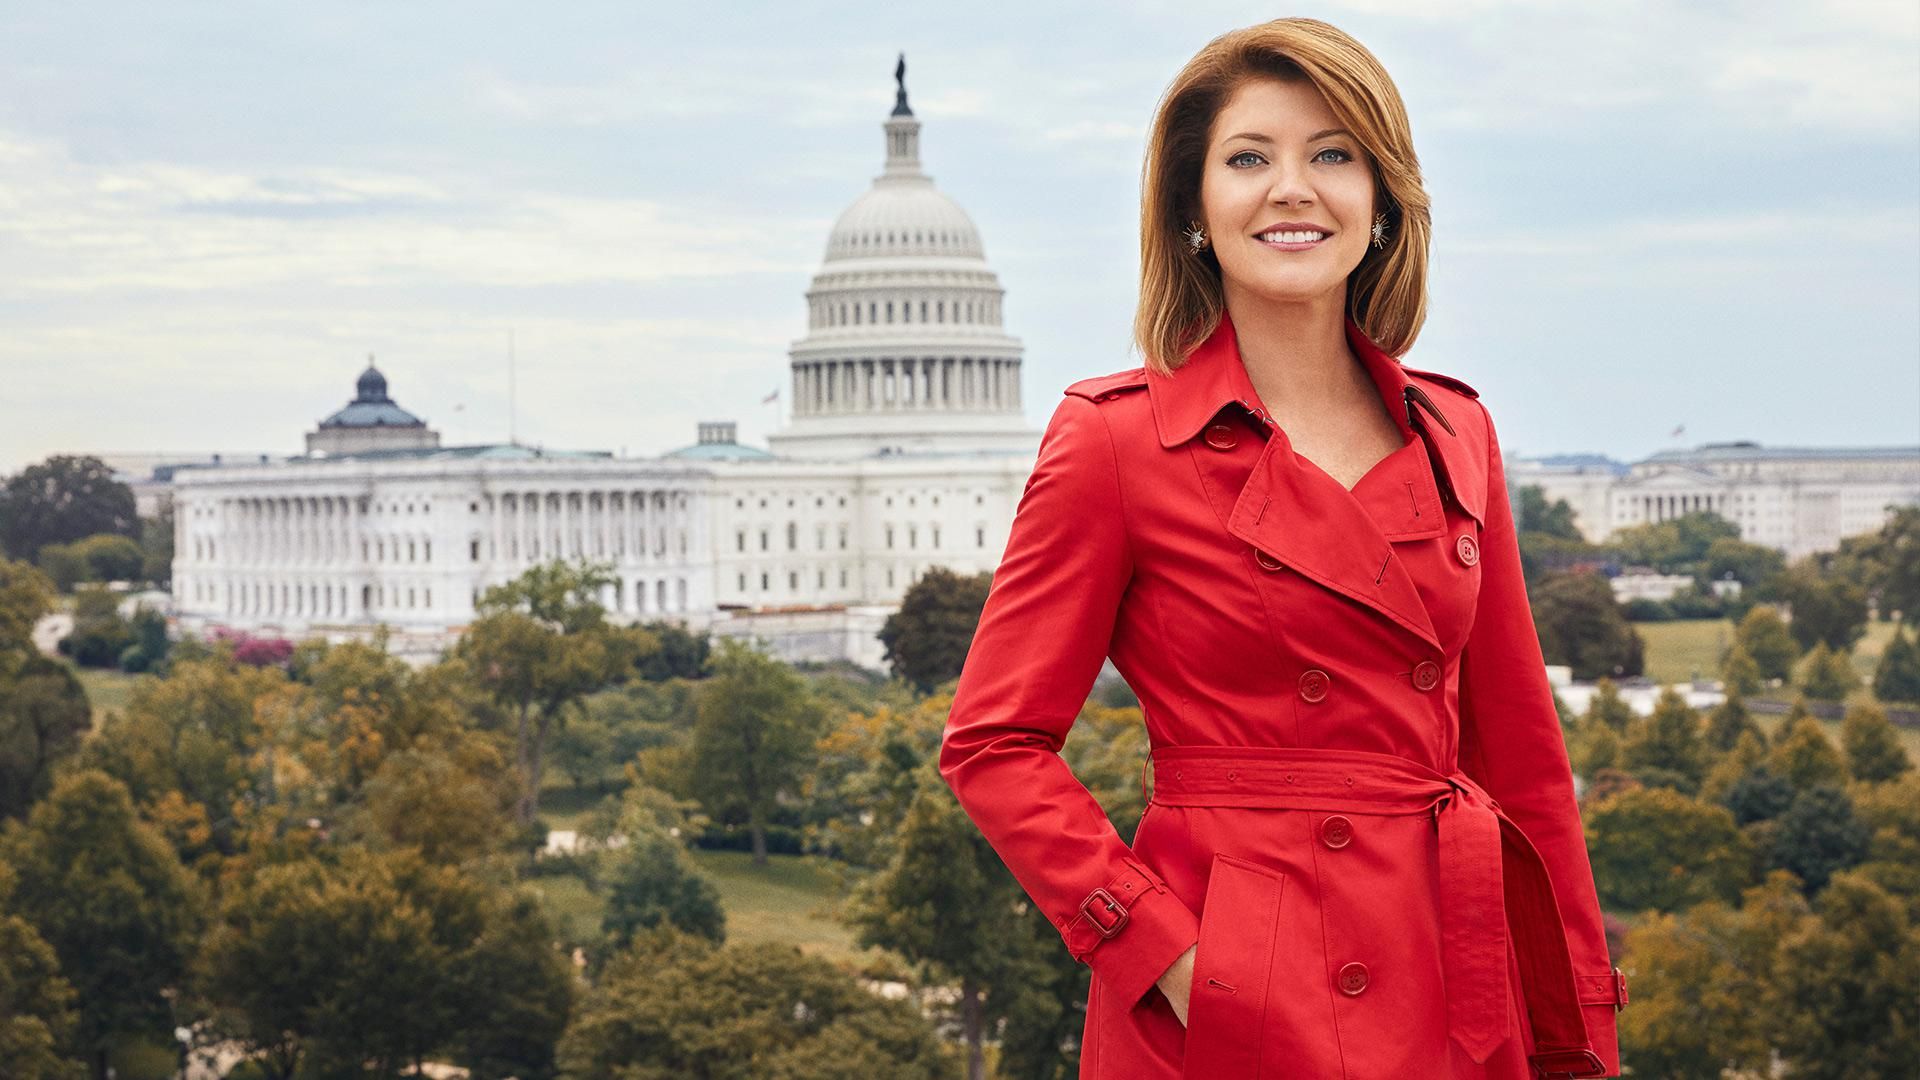 Norah O'Donnell of the CBS Evening News stands in front of the Capital Building.